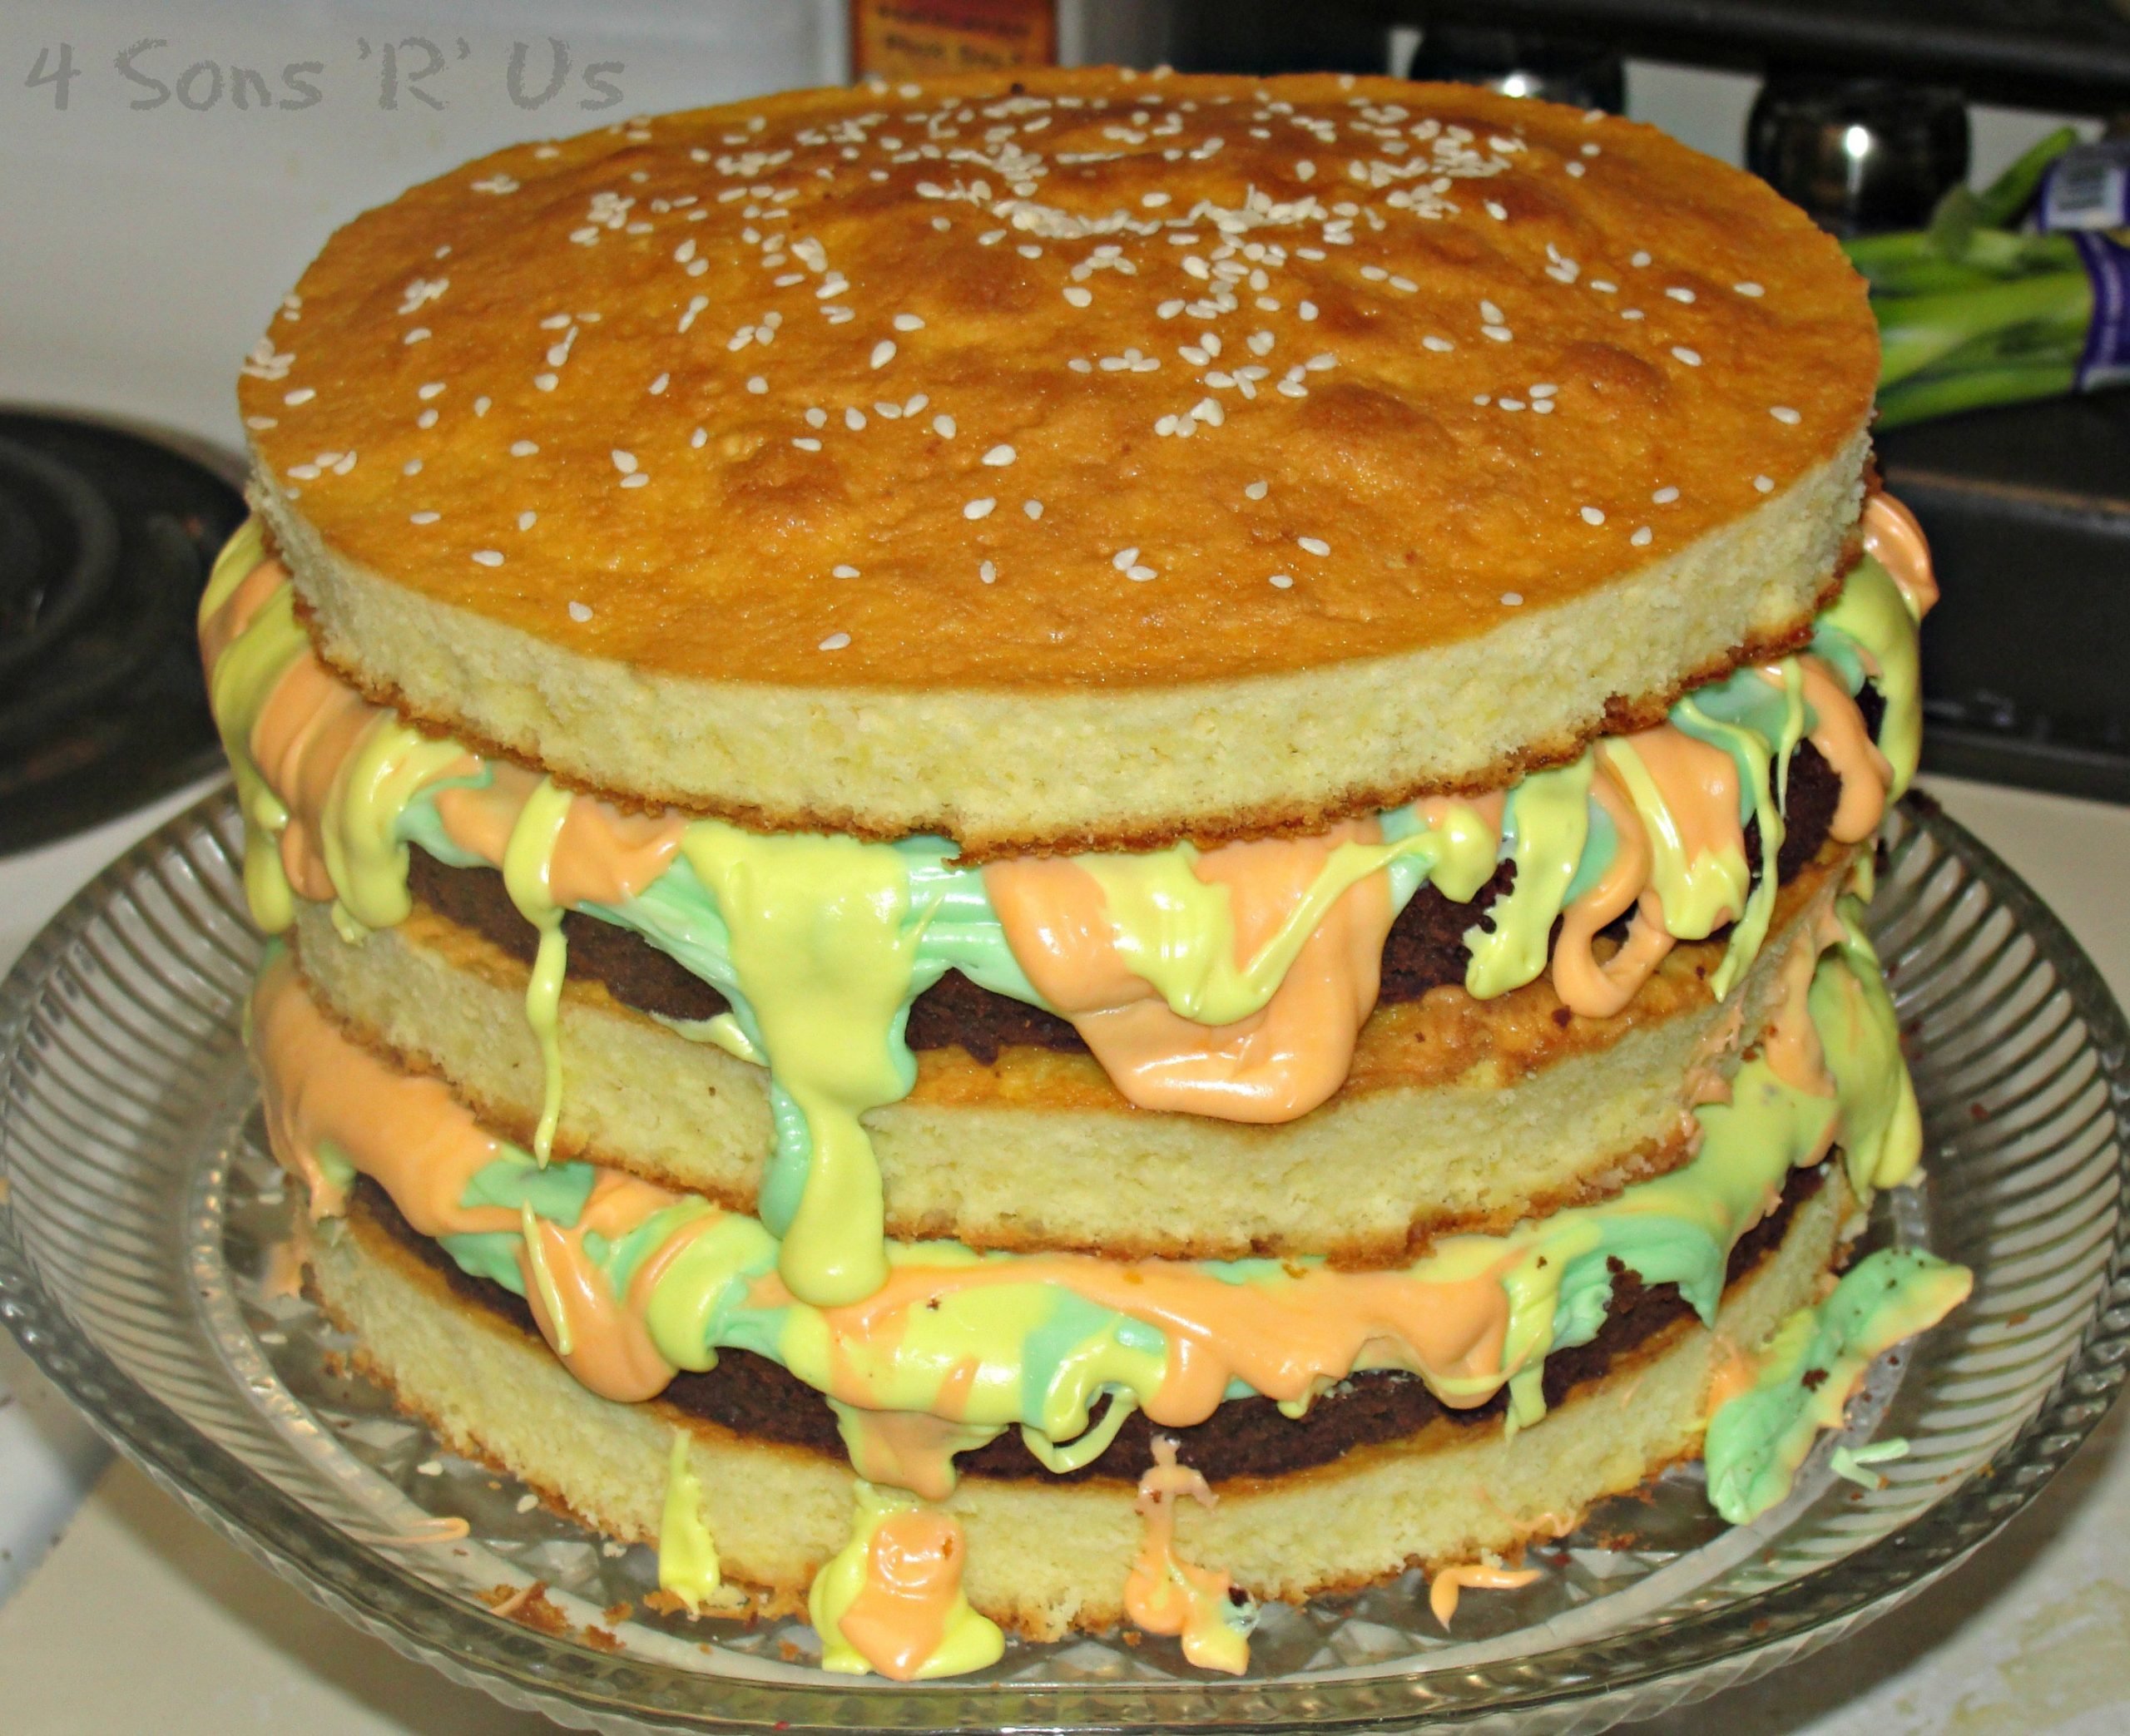 Share more than 75 burger cake ideas best - awesomeenglish.edu.vn